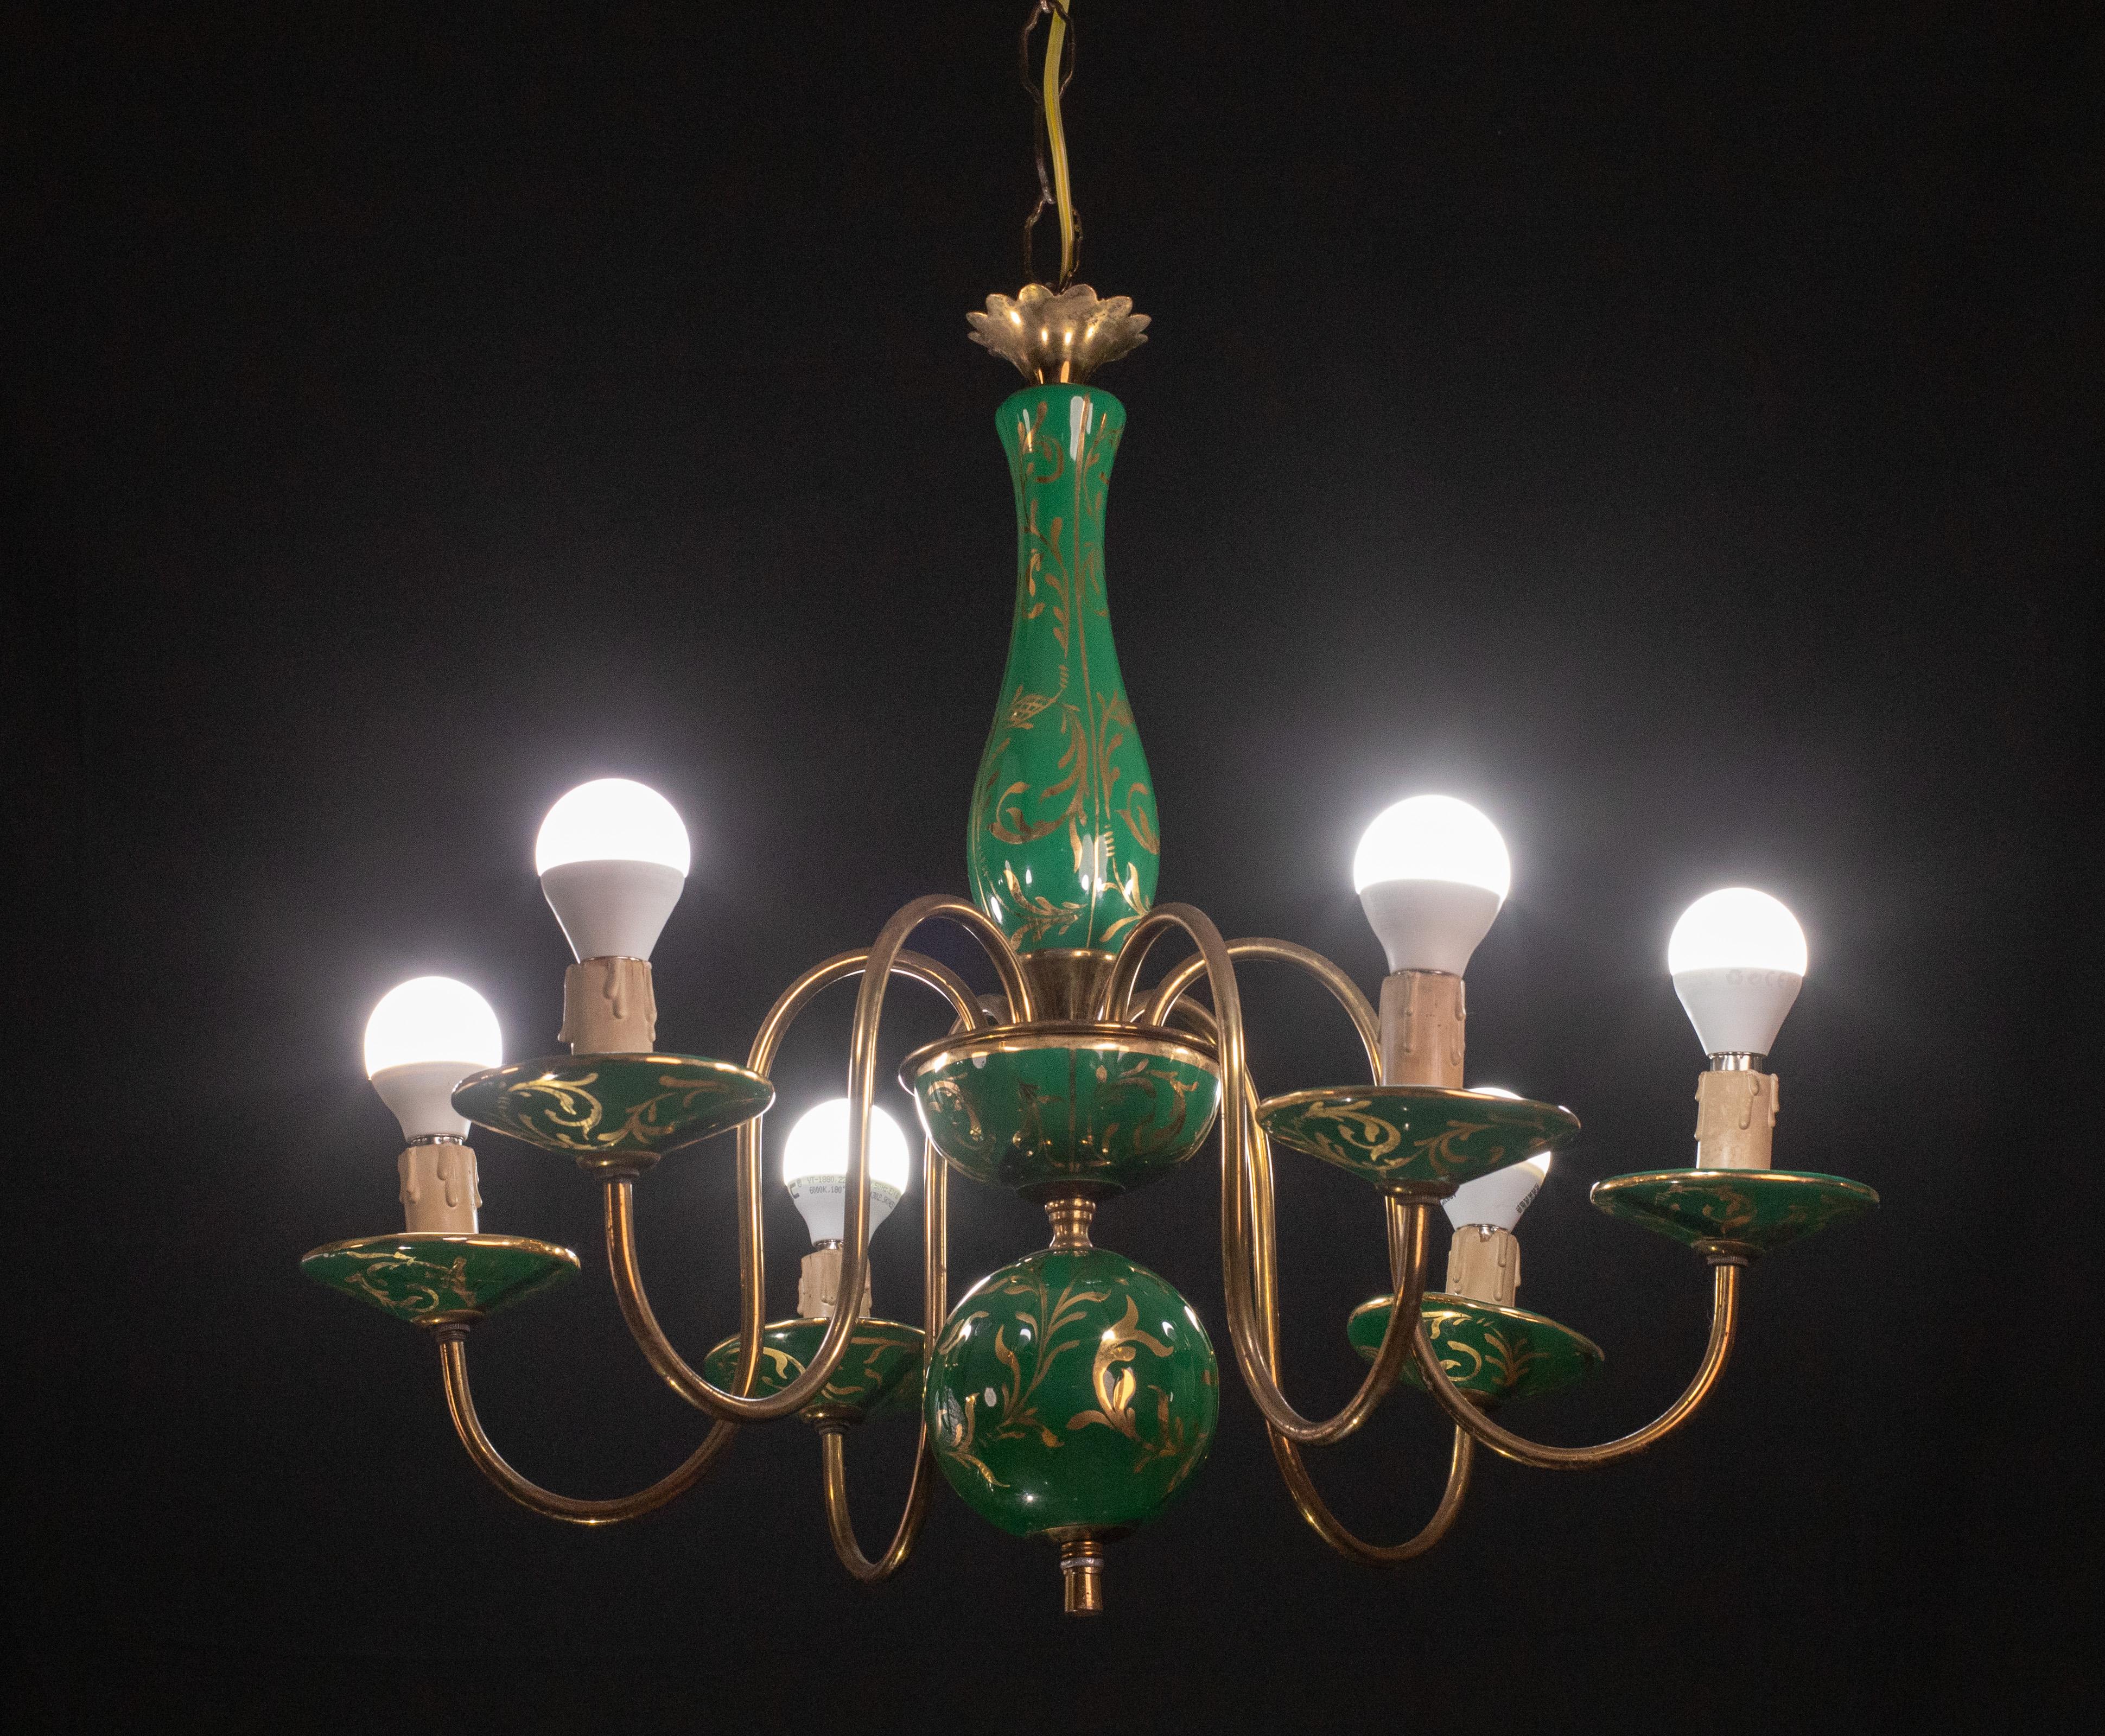 Stunning Art Deco chandelier made of brass and painted terracotta with decorations.

The 6 light points mount a European standard e 14 socket.

Height 120cm, 50 cm without chain, diameter 55 centimeter.

